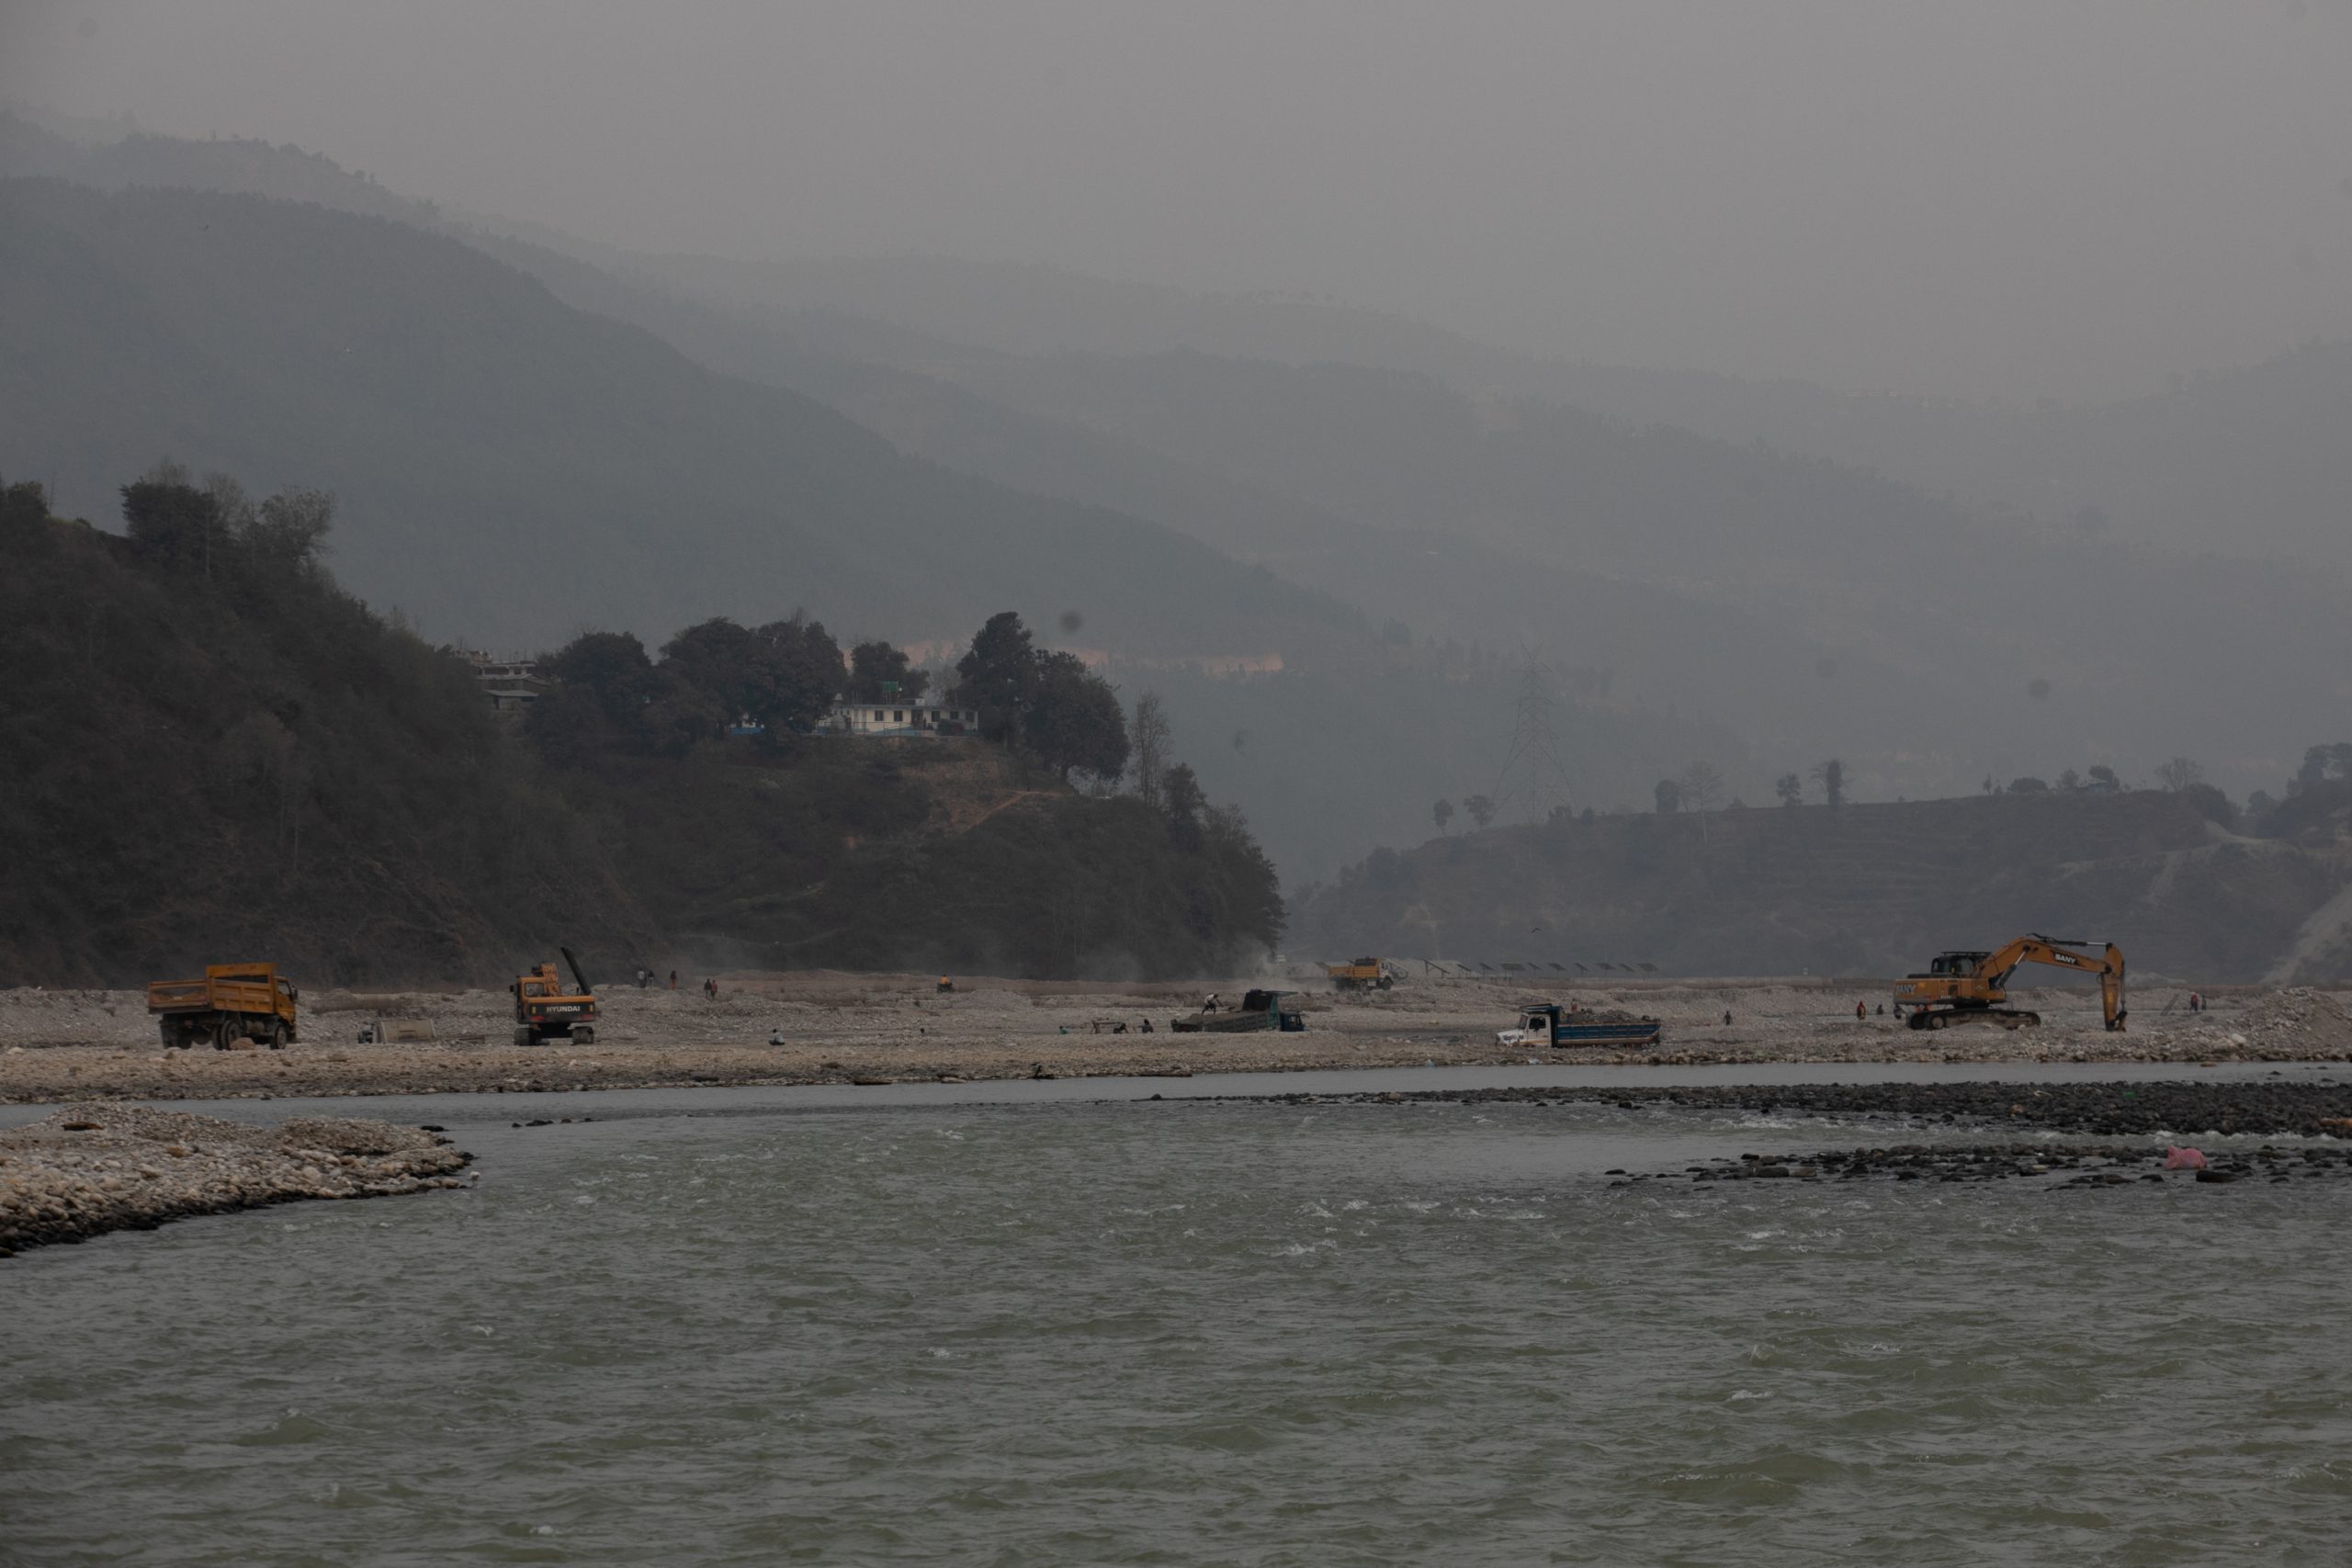 Excavators and trucks lined up along the banks of the Indrawati river in Sindhupalchok. Photo: Bikram Rai for CIJ